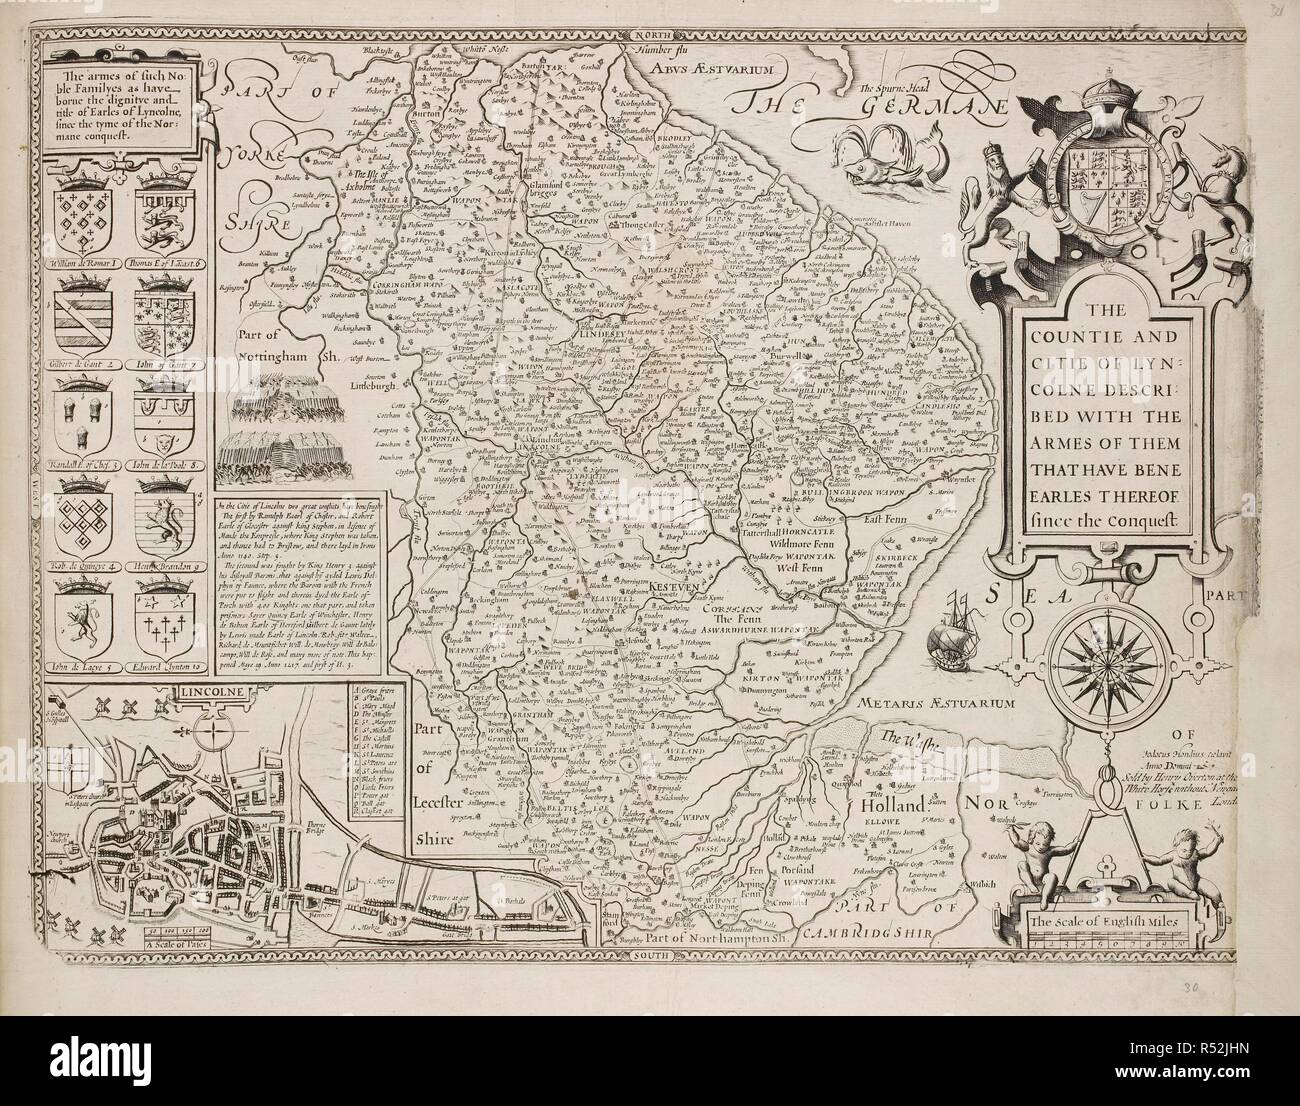 A county map of Lincolnshire. A collection of 37 Maps of the counties of England. London. H. Overton, 1714. A collection of 37 Maps of the counties of England, being reprints, of J. Speedâ€™s maps, by Henry Overton, together with those of P. Stent reprinted by John Overton, and maps of Derbyshire and Yorkshire engraved by S. Nicholls. Source: Maps.145.c.9 30. Language: English. Stock Photo